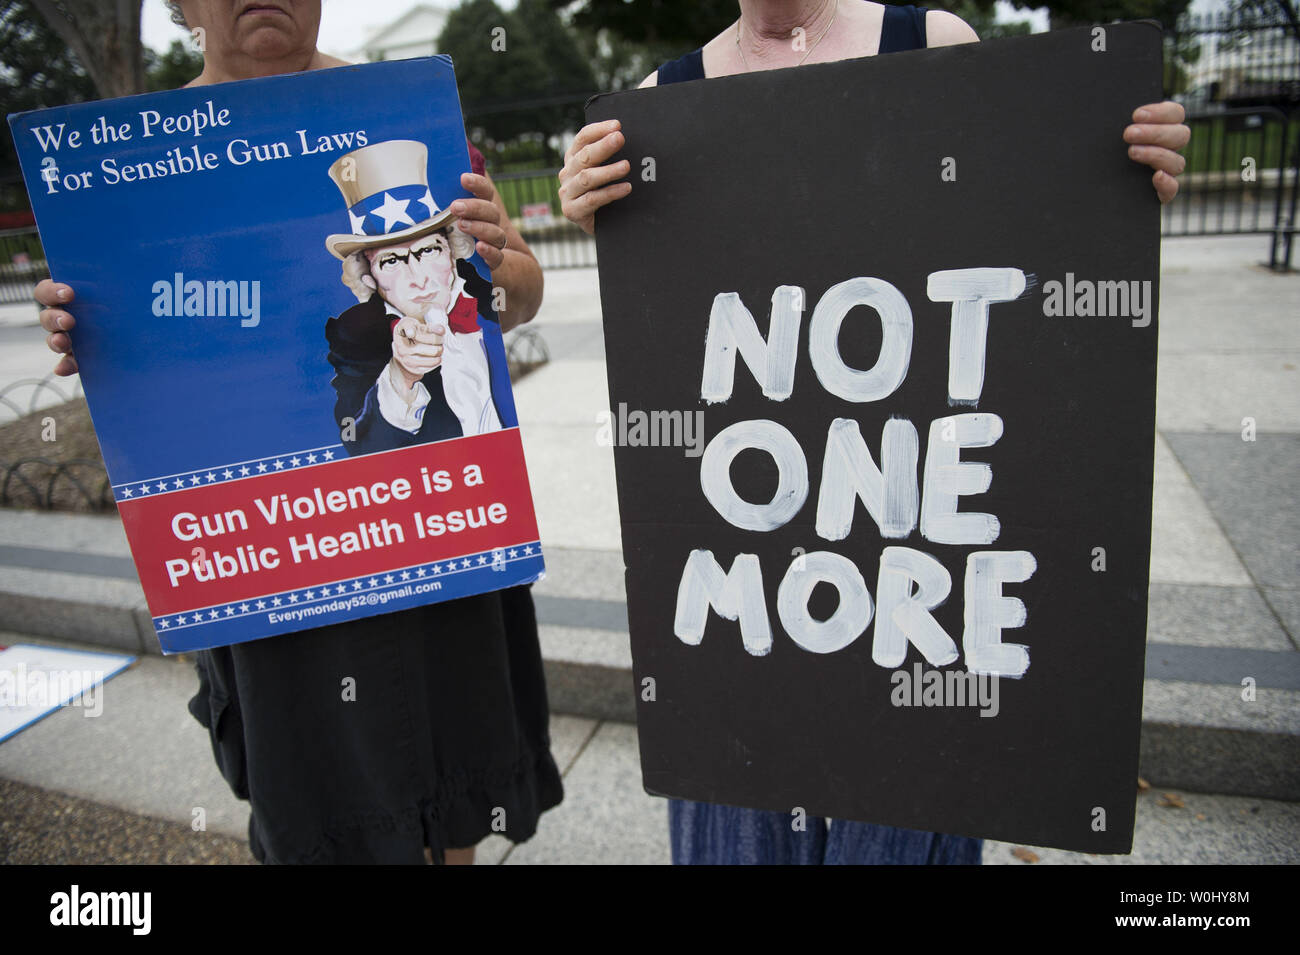 Members of the gun law advocacy group We The People For Sensible Gun Laws hold a rally calling on Congress to strengthen gun laws to require gun safety training, reinstate the assault weapons ban and ban high capacity .ammunition magazines, near the White House in Washington, D.C. on August 31, 2015. Photo by Kevin Dietsch/UPI Stock Photo